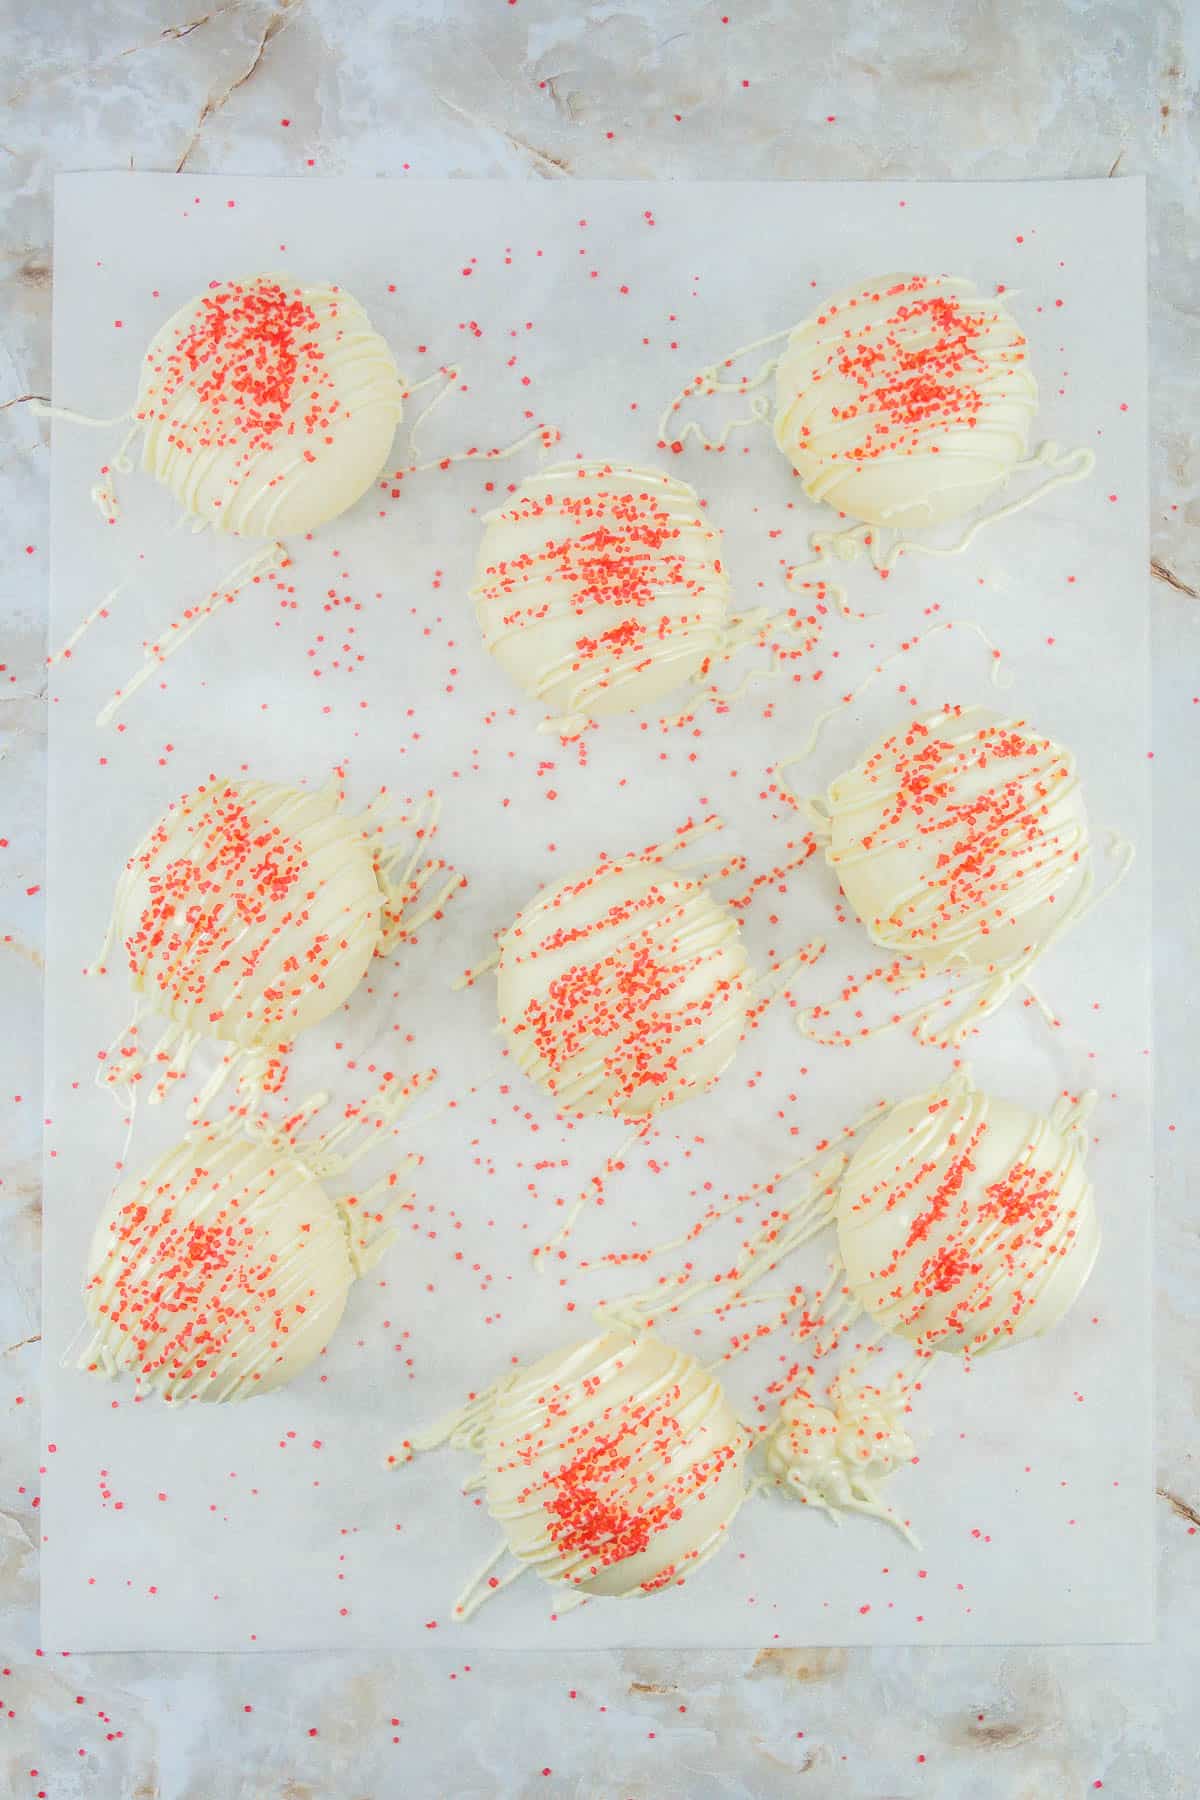 Fireball Hot Chocolate Bombs on a piece of baking parchment decorated with melted chocolate drizzles and red sanding sugar.